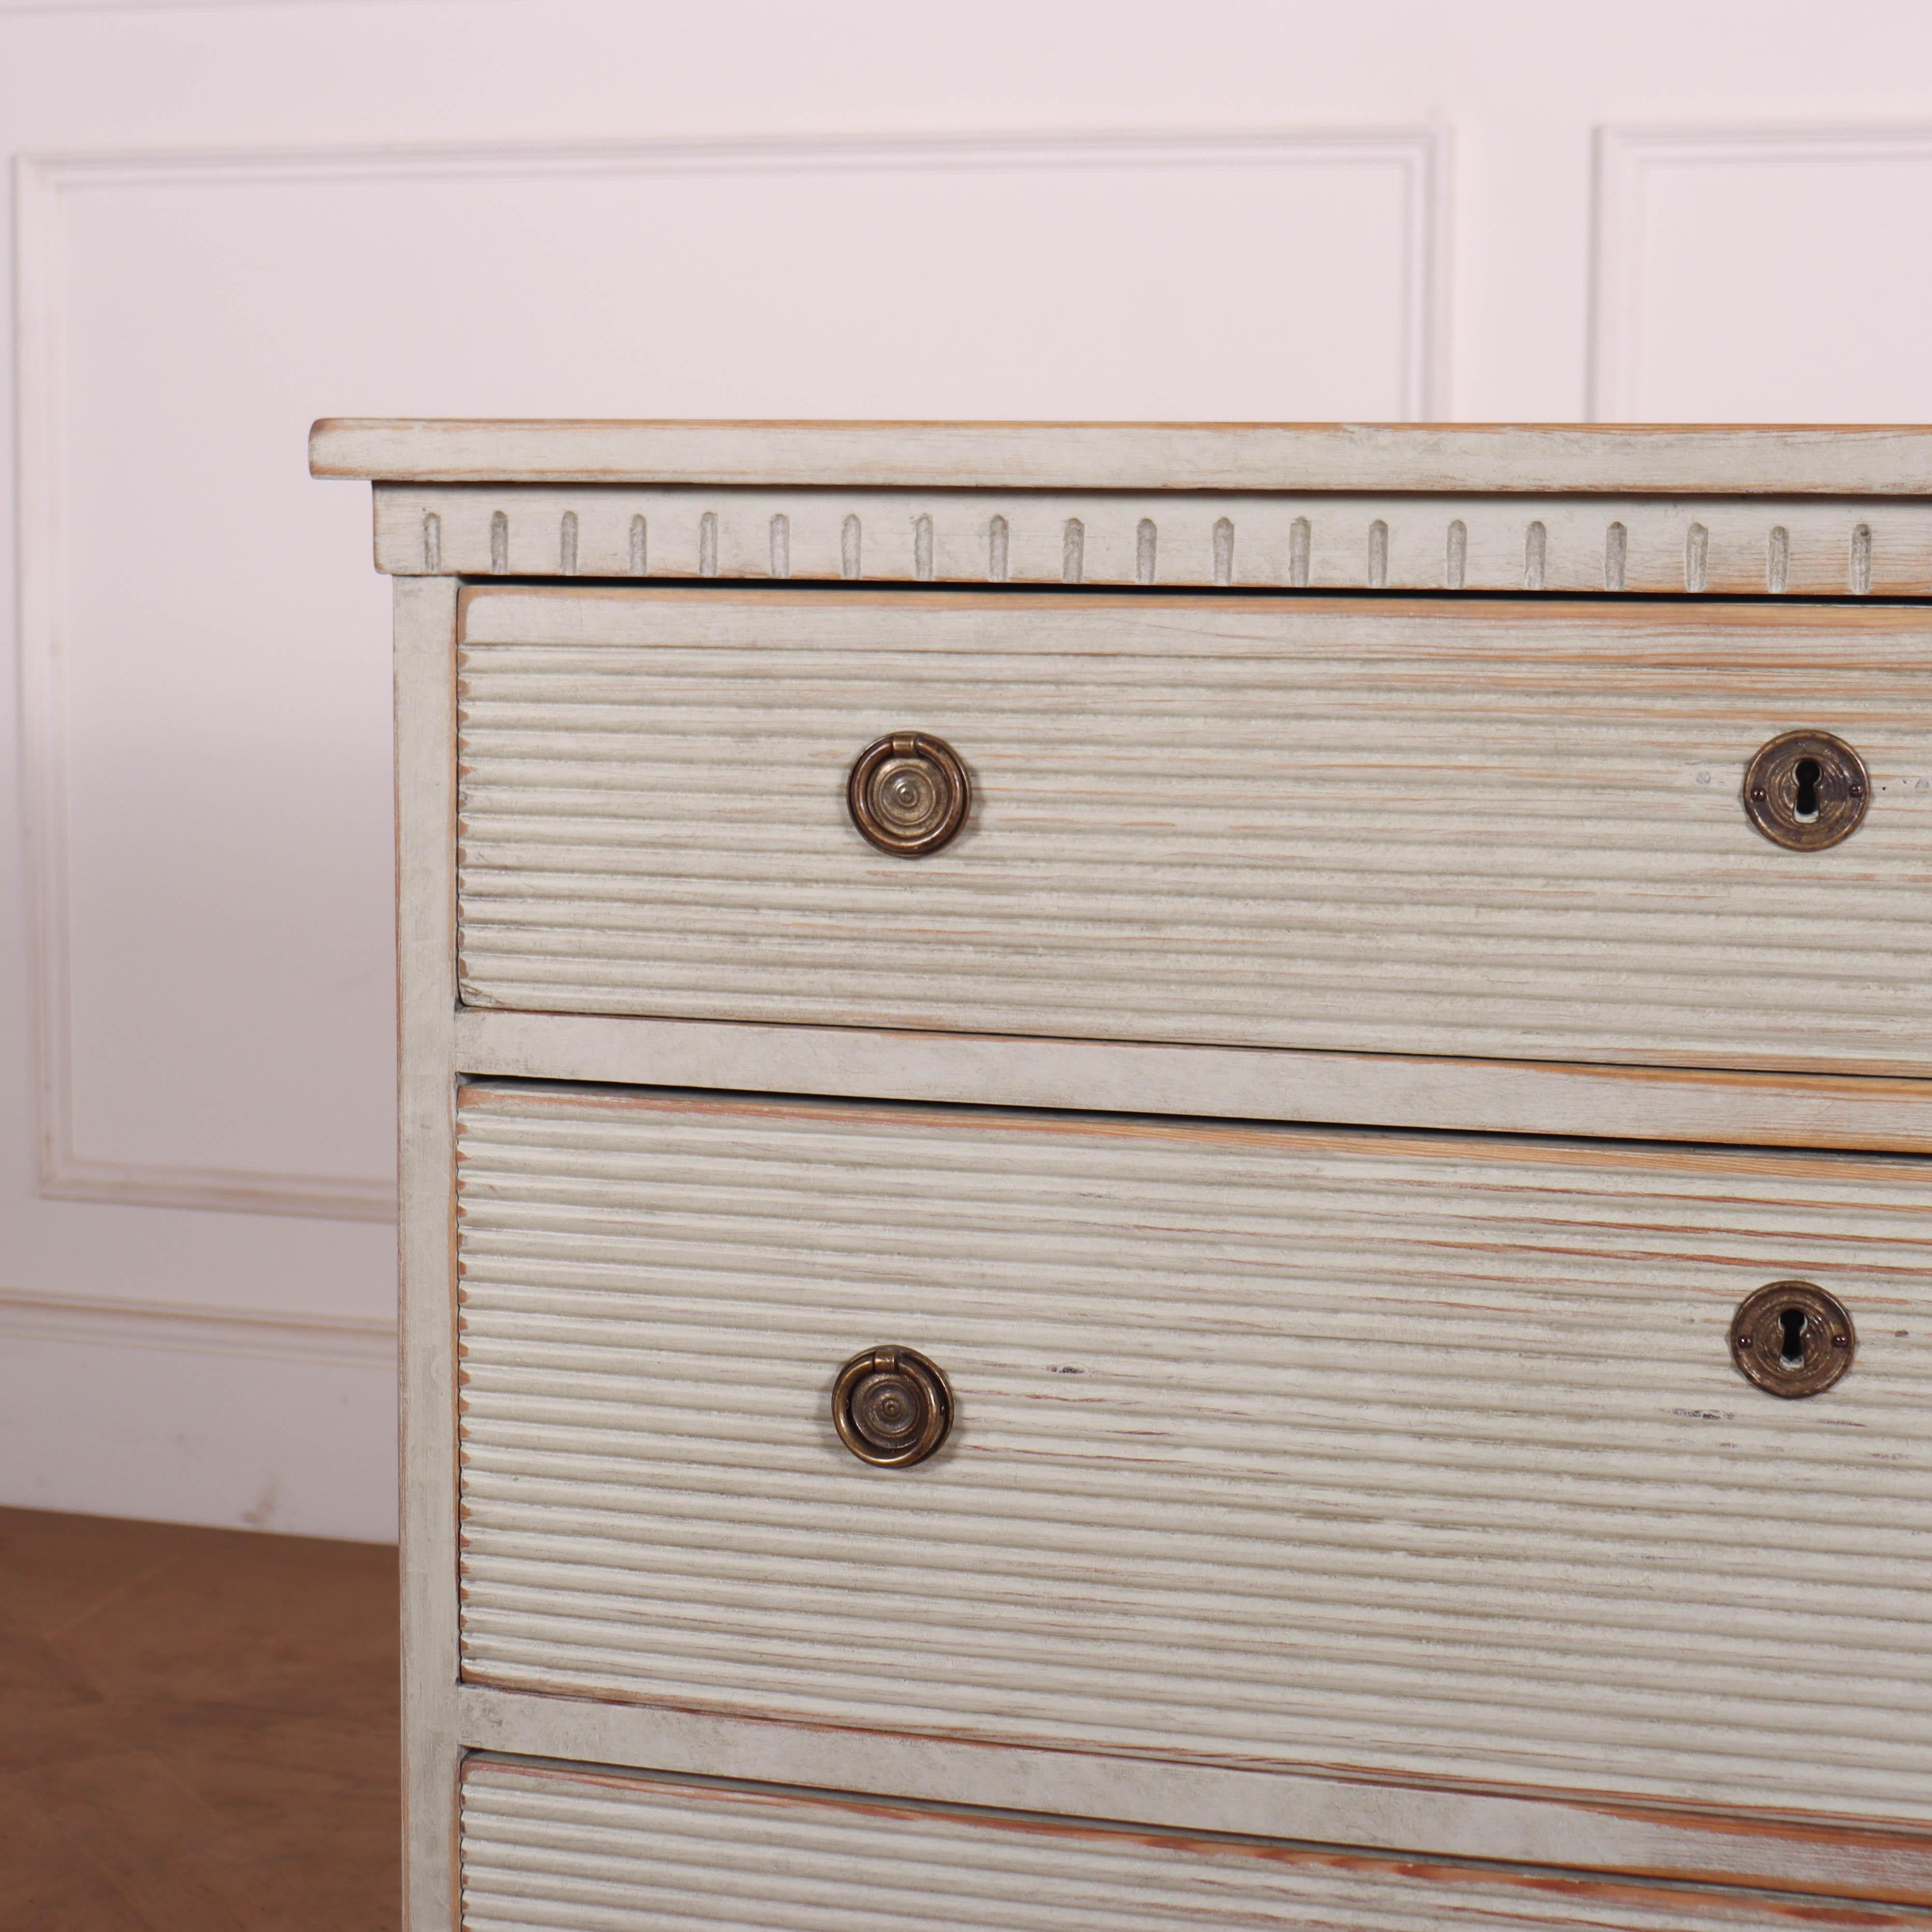 Early 19th century painted pine Swedish 3 drawer commode with reeded drawer fronts. 1820.

Reference: 7852

Dimensions
37 inches (94 cms) Wide
19 inches (48 cms) Deep
33 inches (84 cms) High.